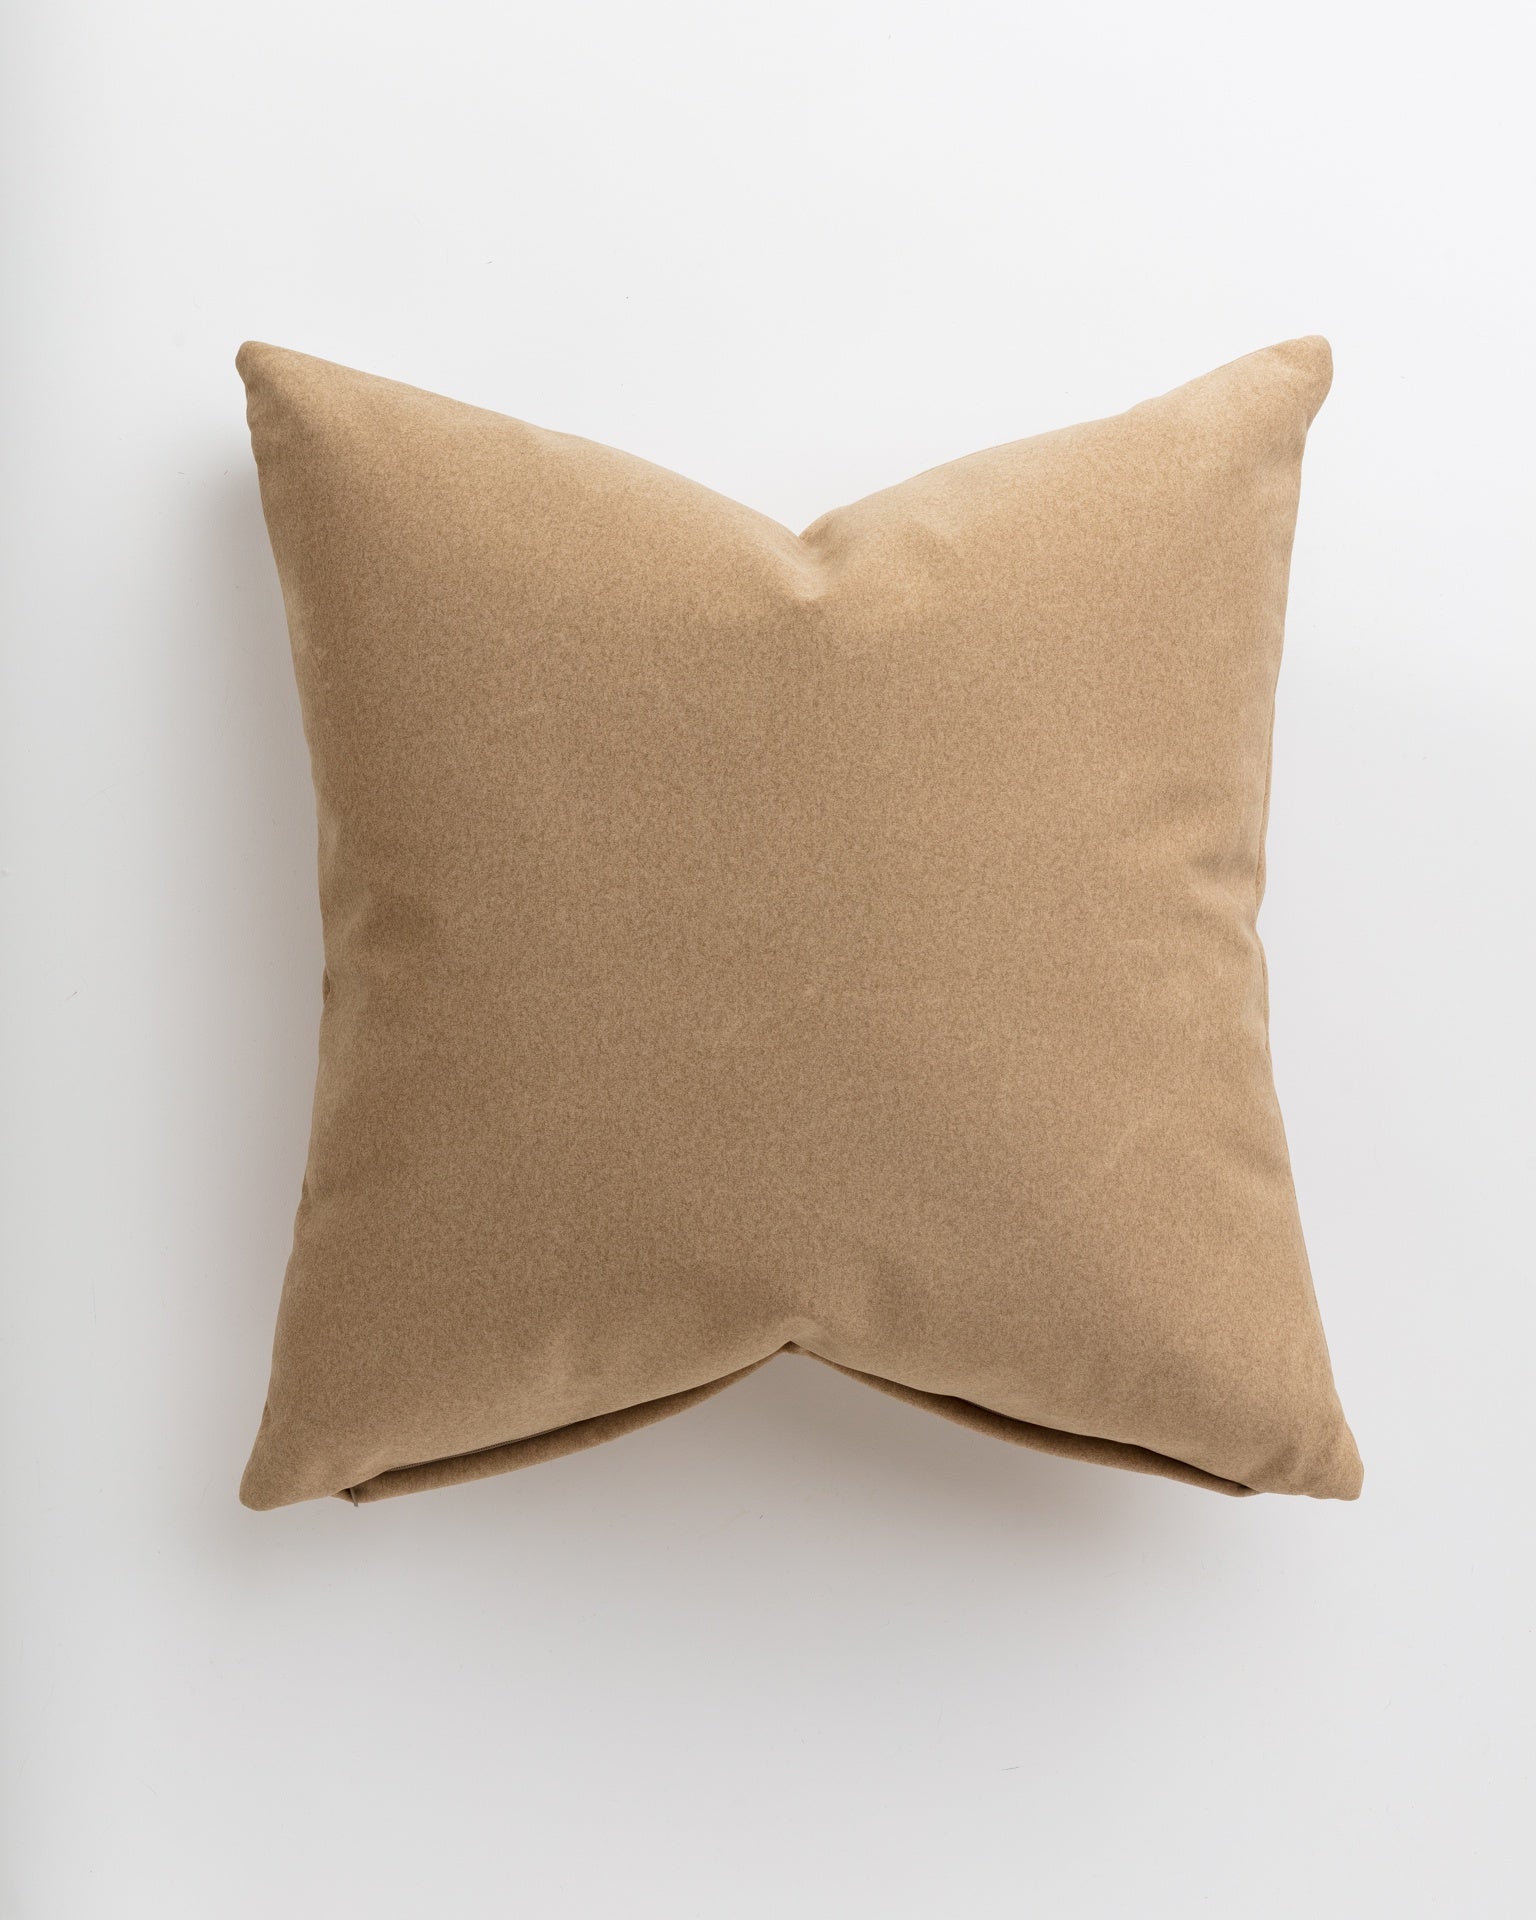 A simple Soft Camel 24x24&quot; throw pillow with a smooth texture, showcased against a plain white background in a Scottsdale Arizona bungalow by Gabby.